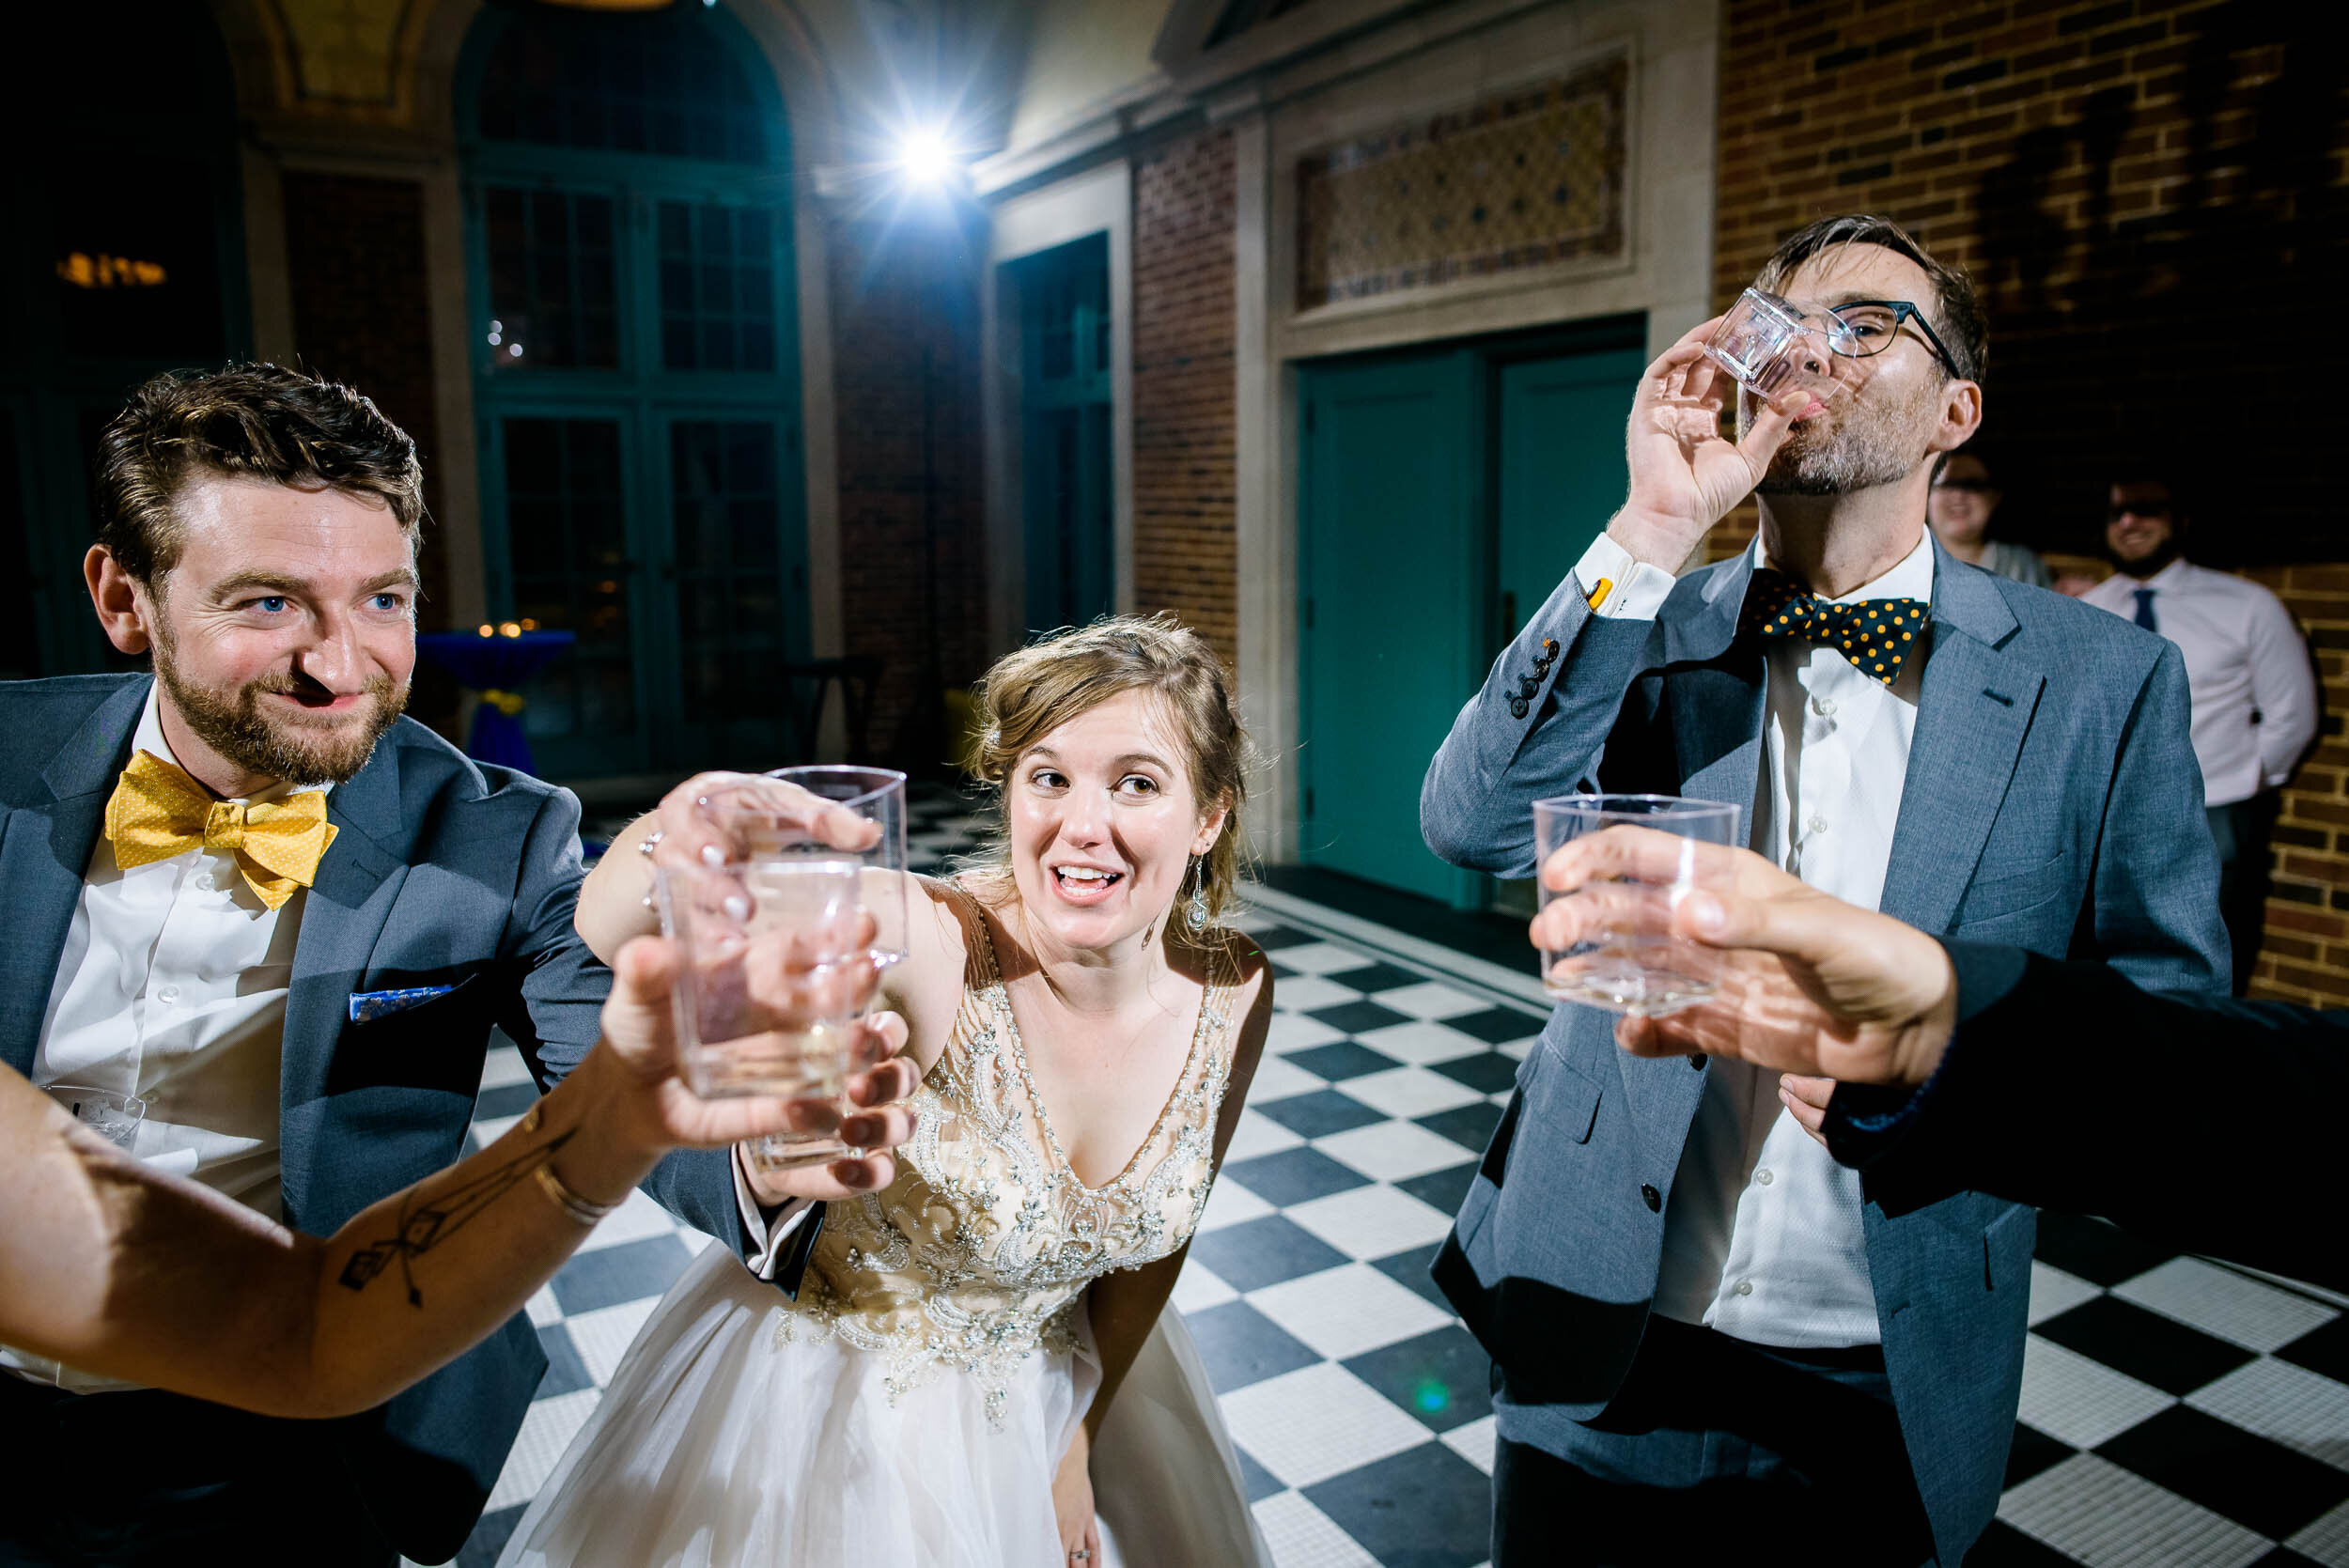 Wedding party does a shot to kick off the reception: Columbus Park Refectory Chicago wedding captured by J. Brown Photography.